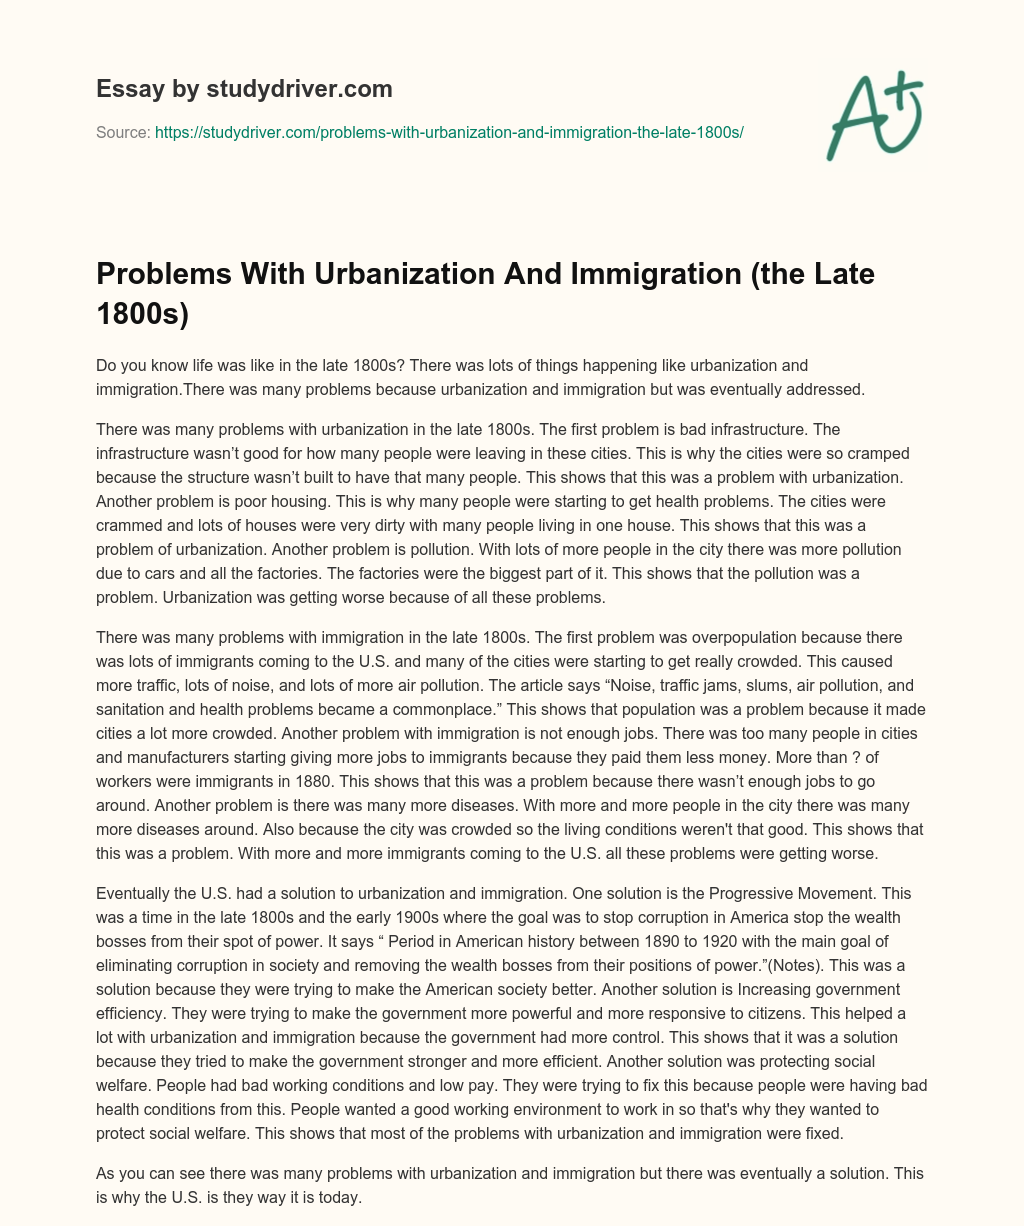 Problems with Urbanization and Immigration (the Late 1800s) essay